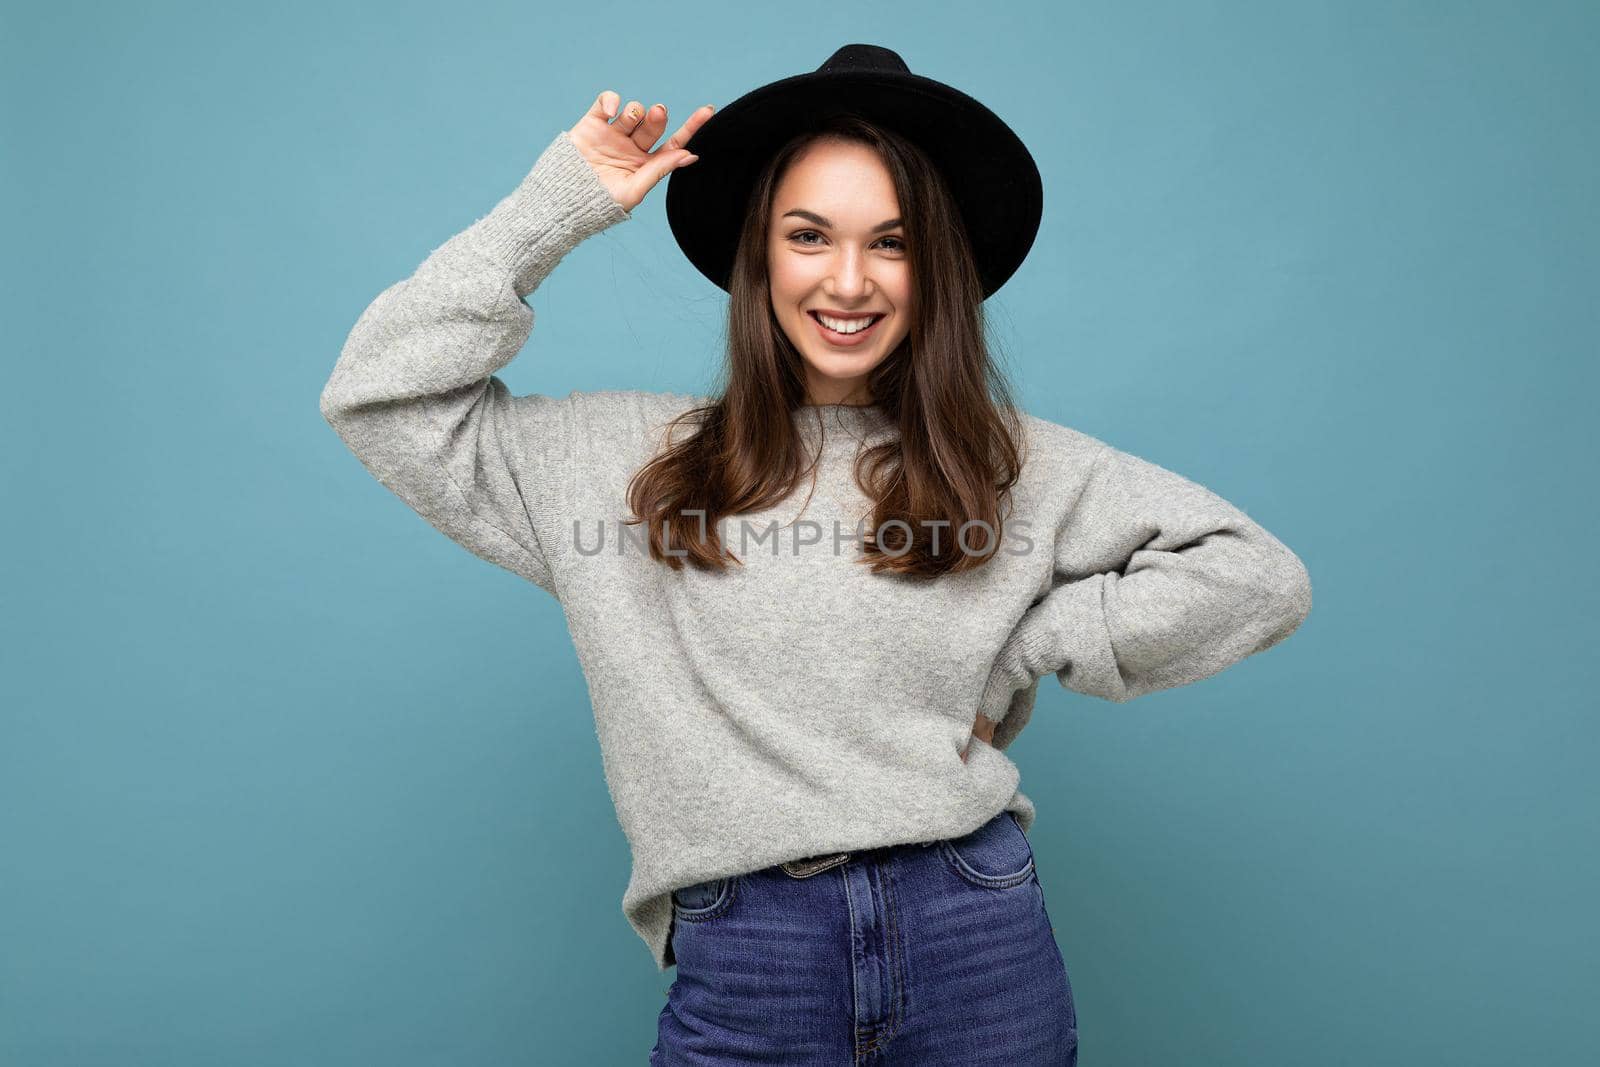 Portrait of positive cheerful fashionable woman in stylish clothes isolated on blue background with copy space.